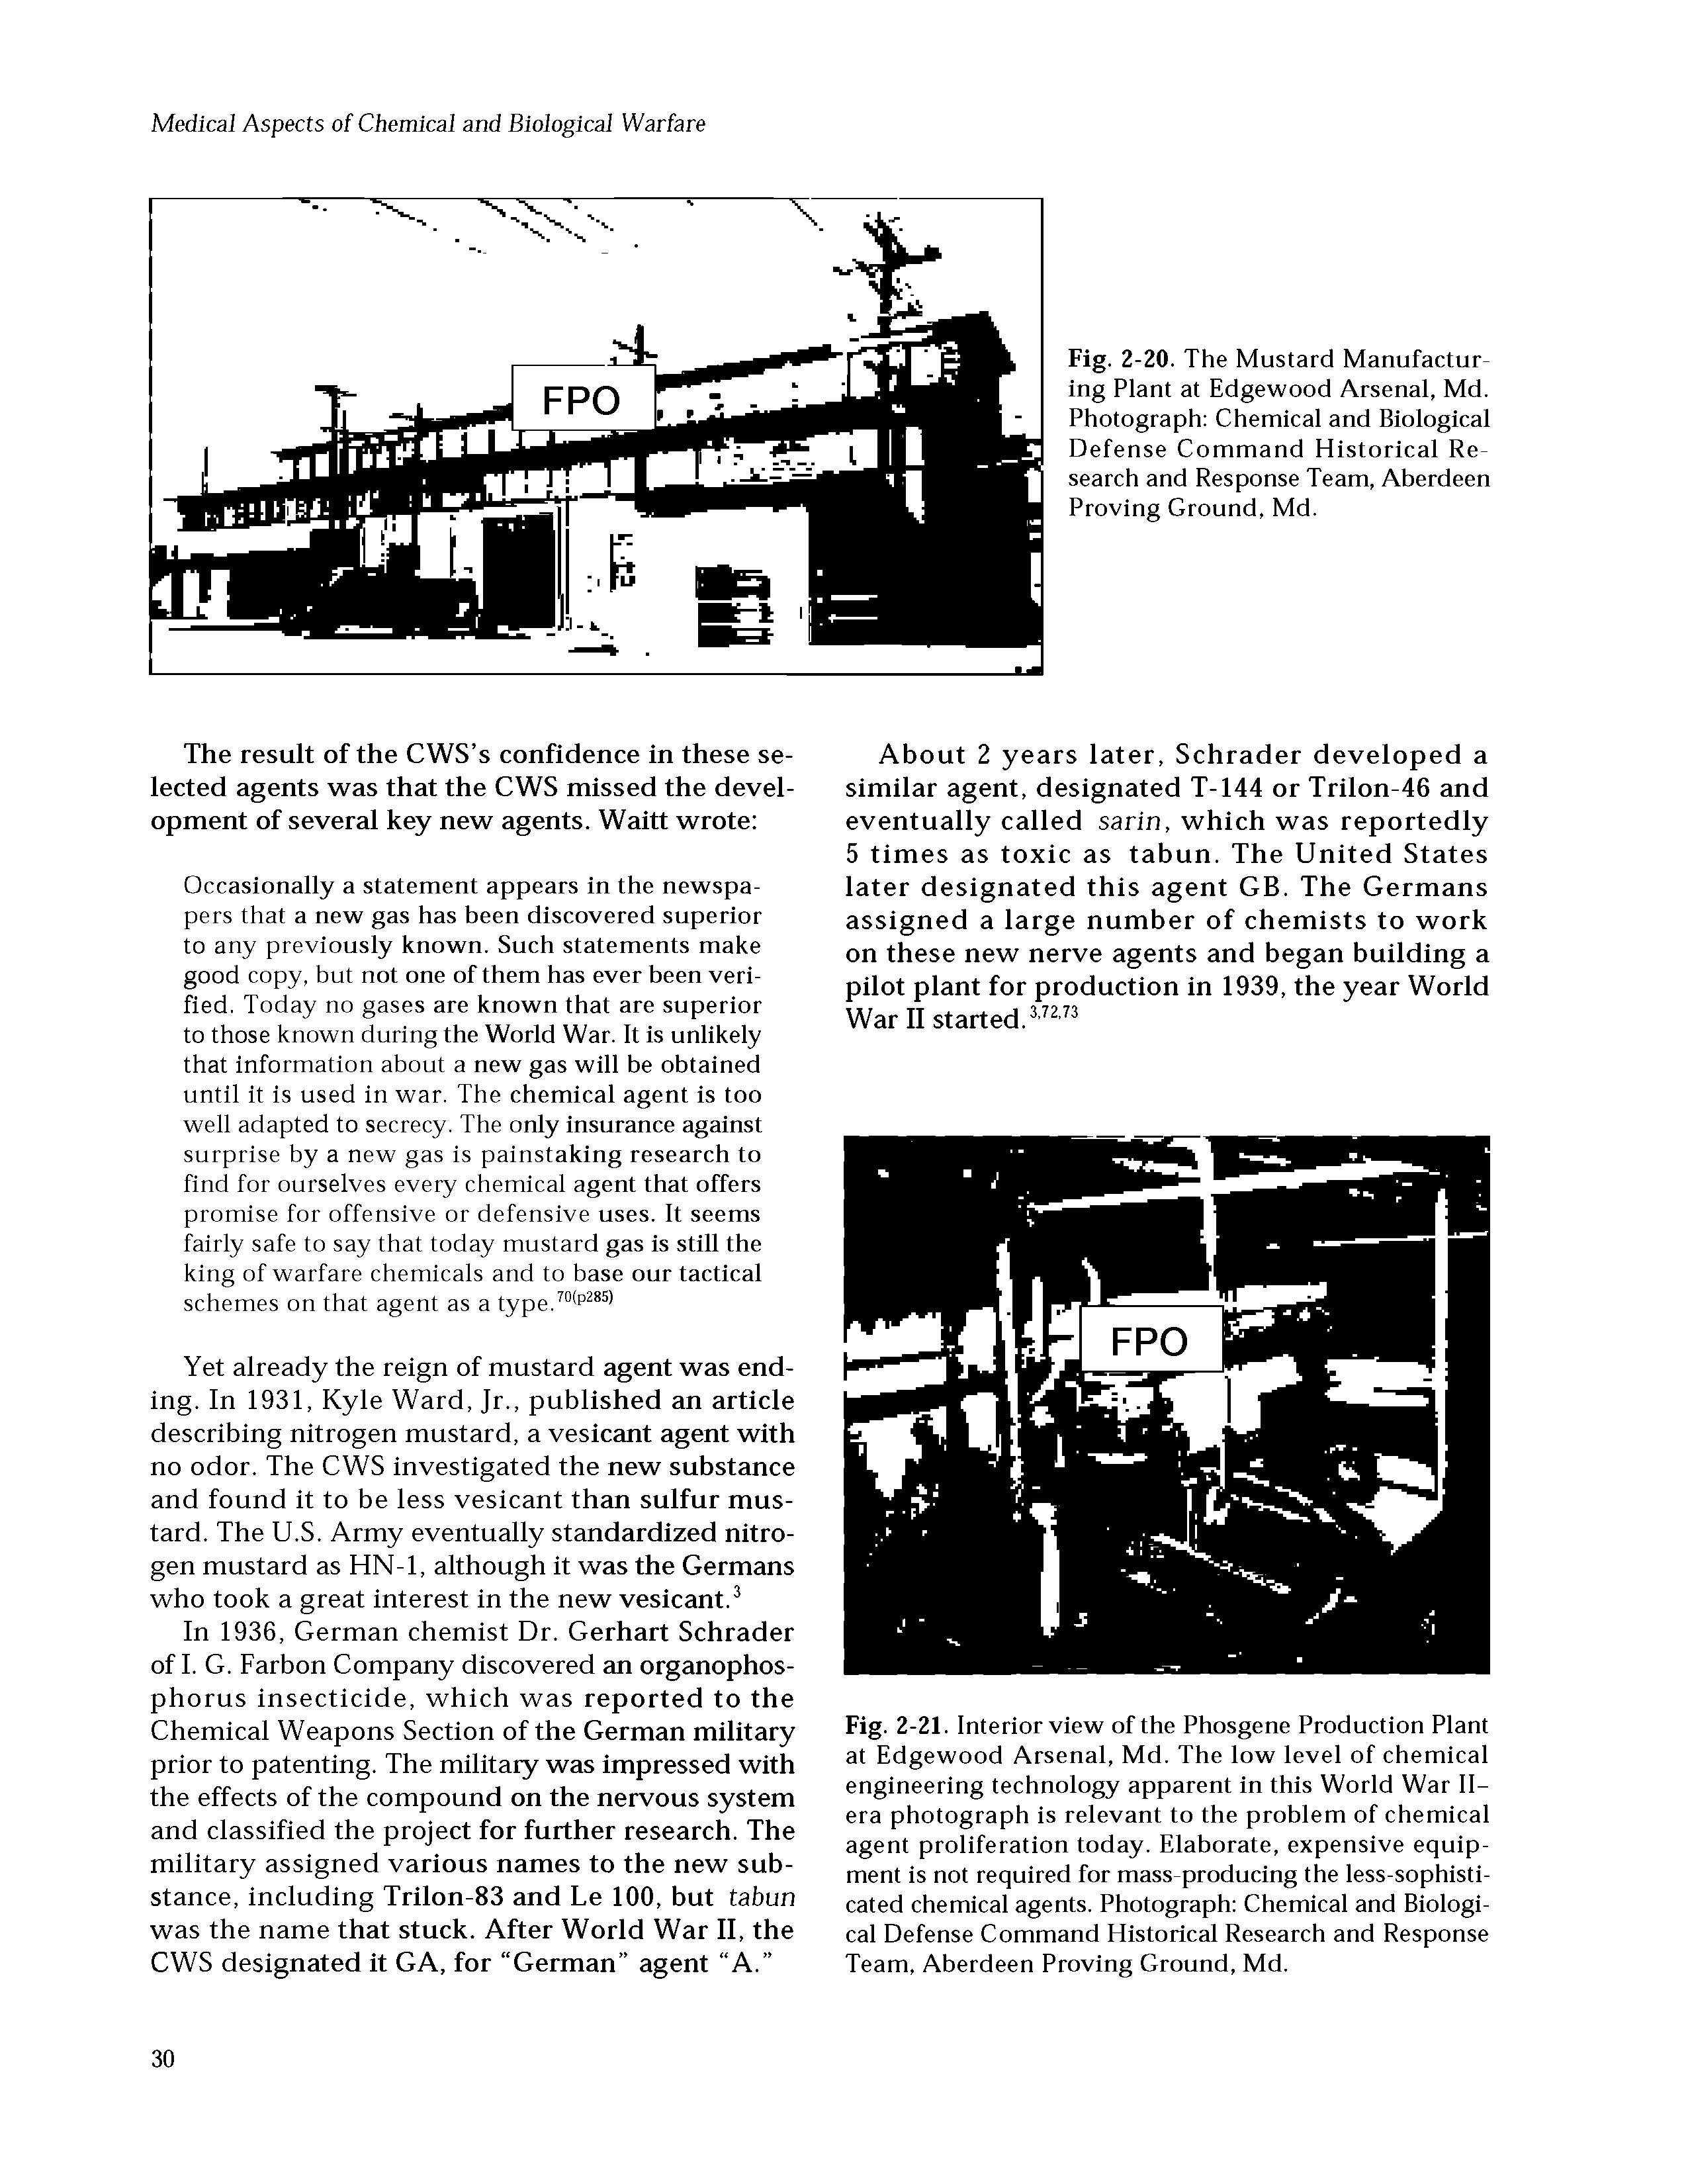 Fig. 2-20. The Mustard Manufacturing Plant at Edgewood Arsenal, Md. Photograph Chemical and Biological Defense Command Historical Research and Response Team, Aberdeen Proving Ground, Md.